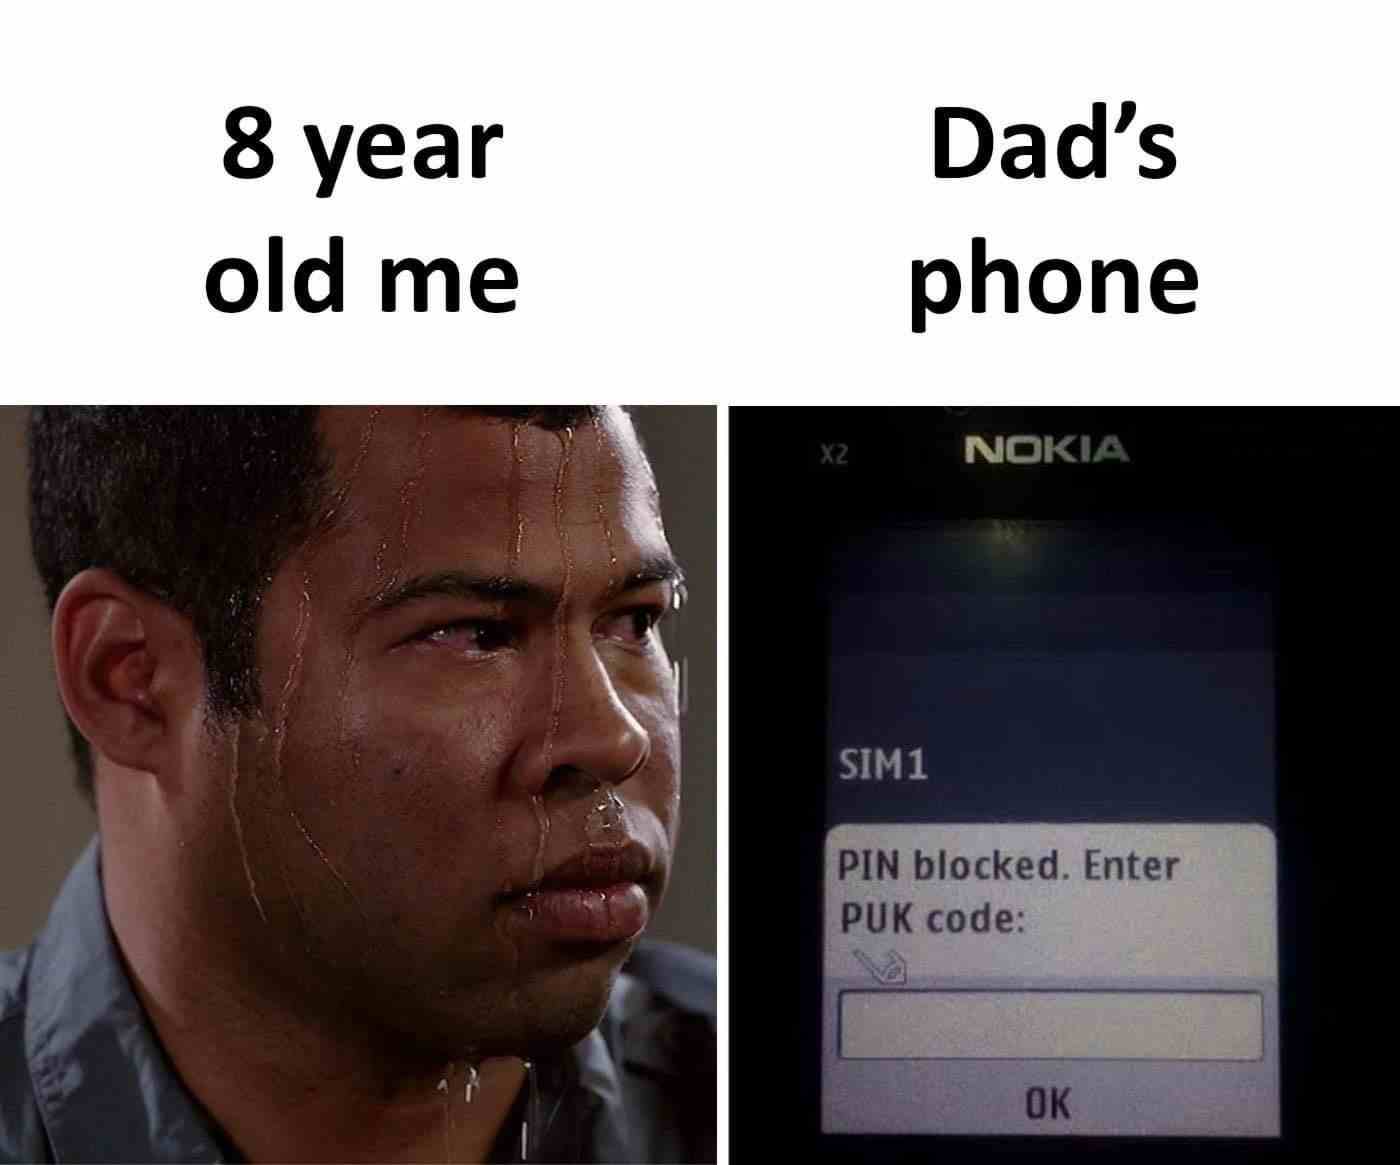 8 year old me vs Dad's phone